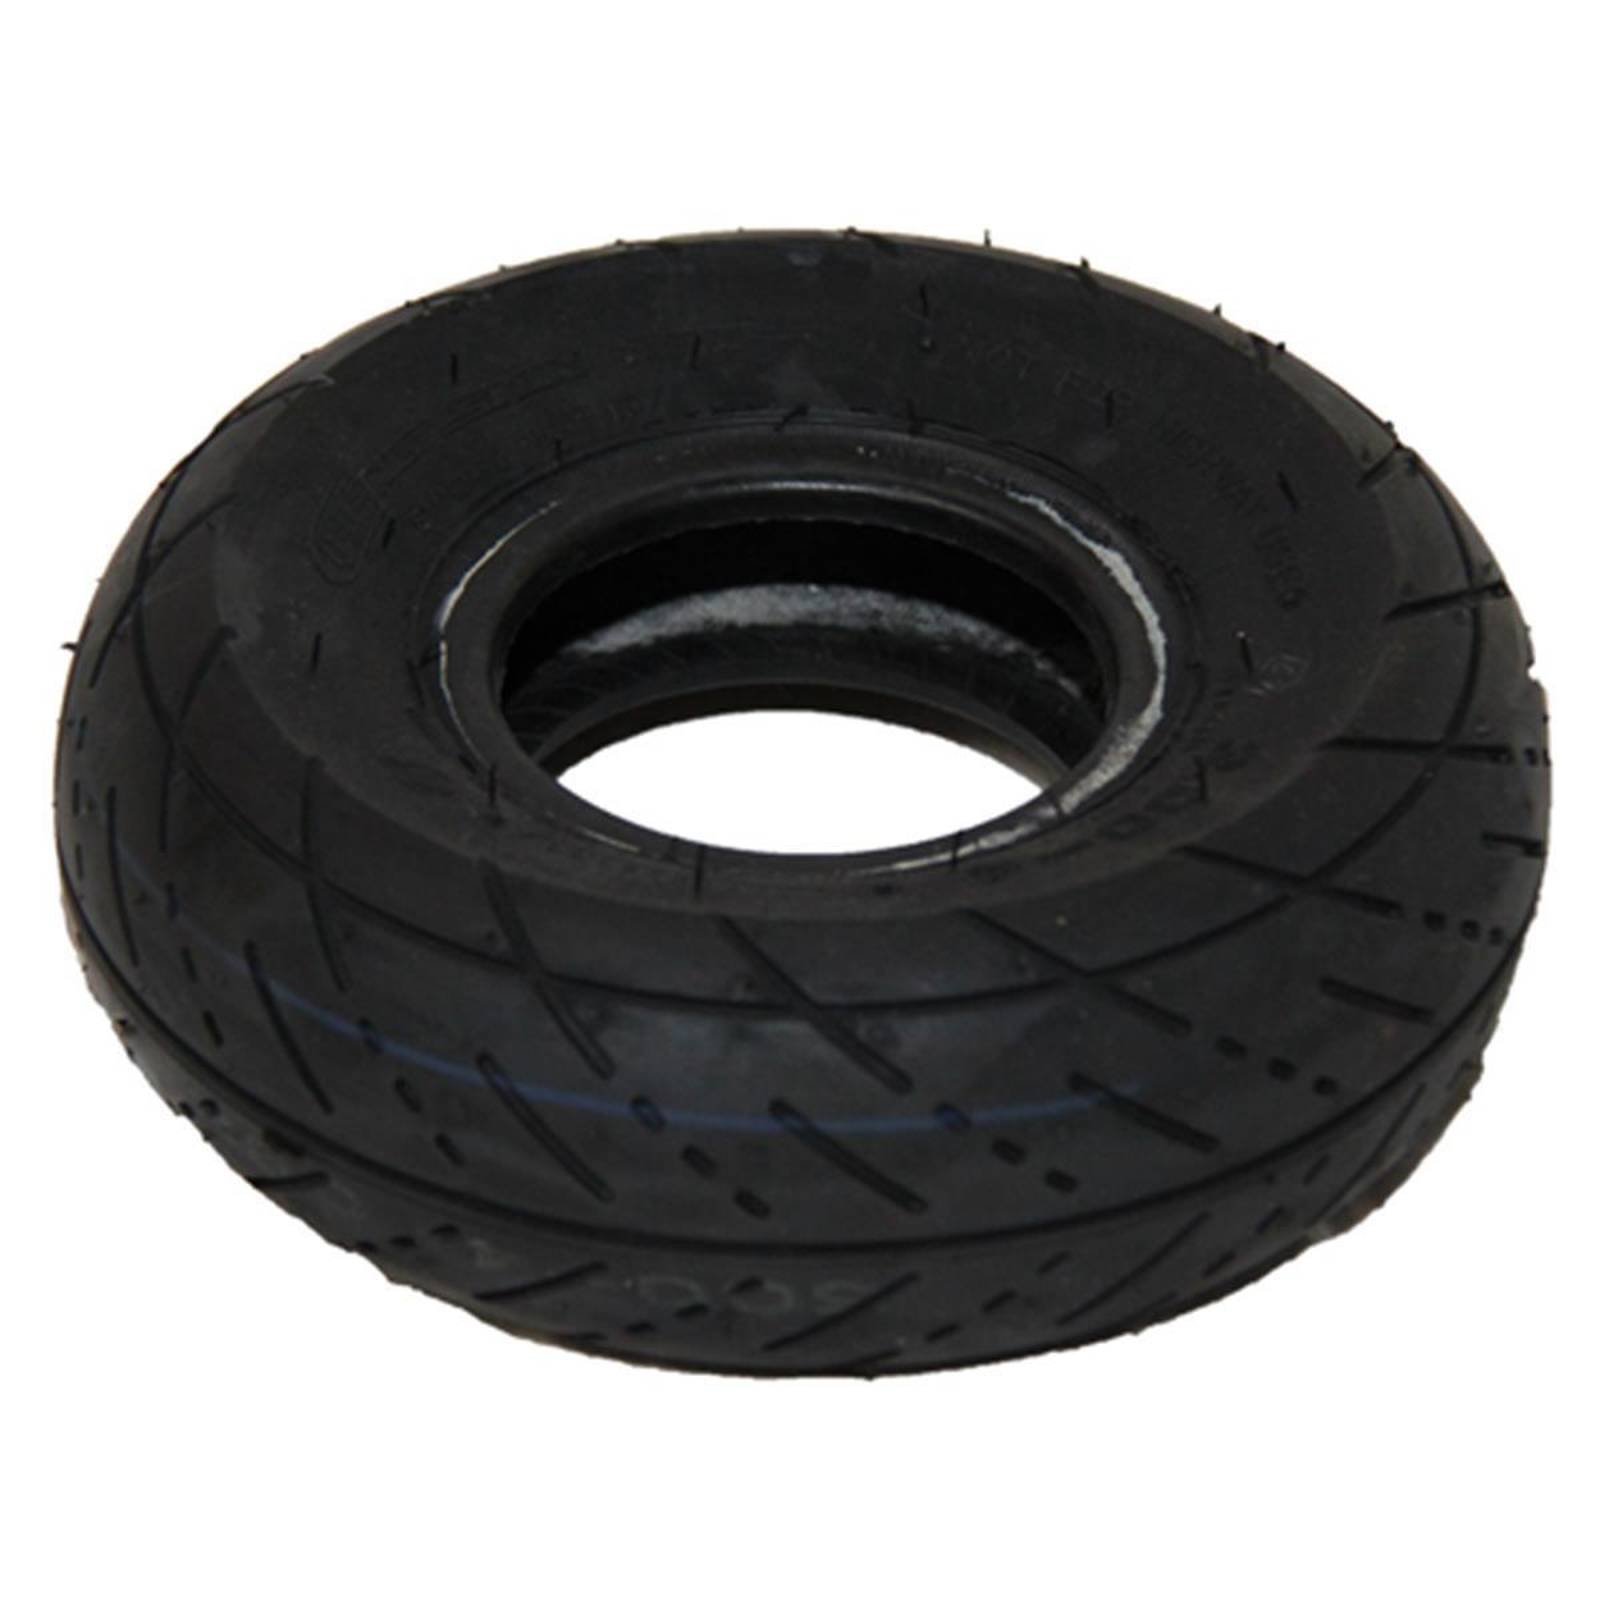 CST 10" Tyre with camera (3.50-4)